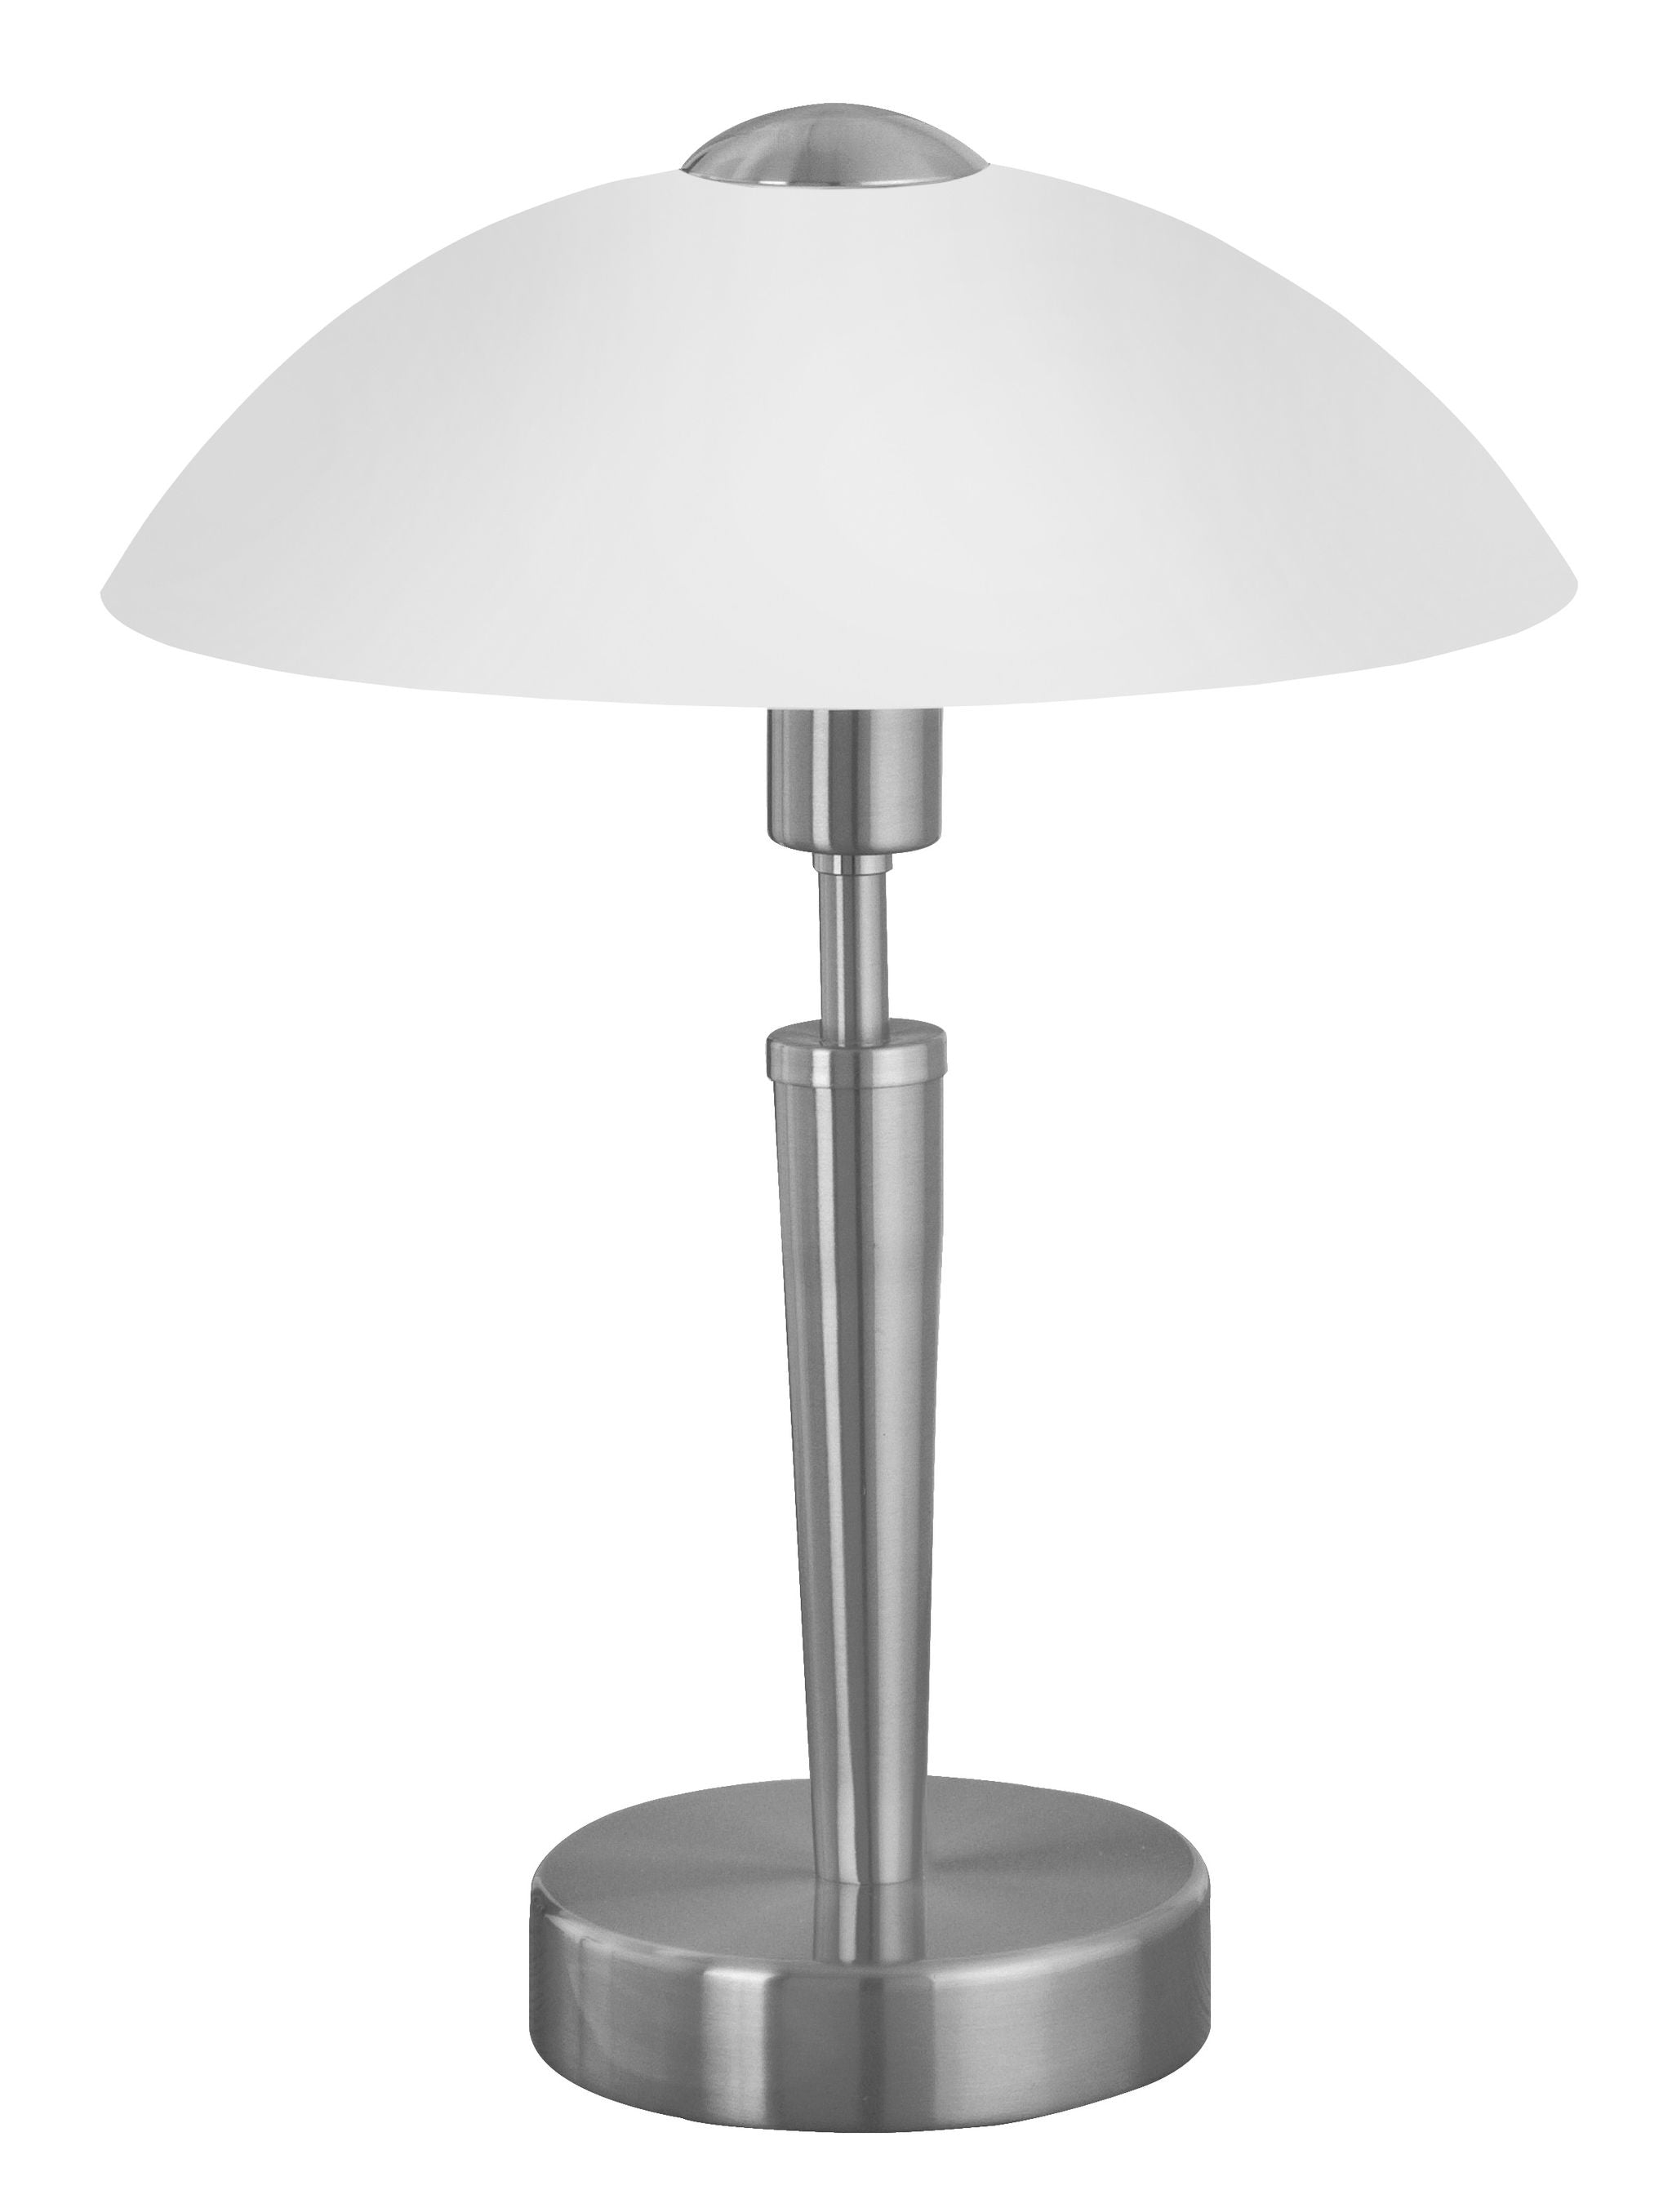 Solo 1 Table lamp Stainless steel - 85104A | EGLO